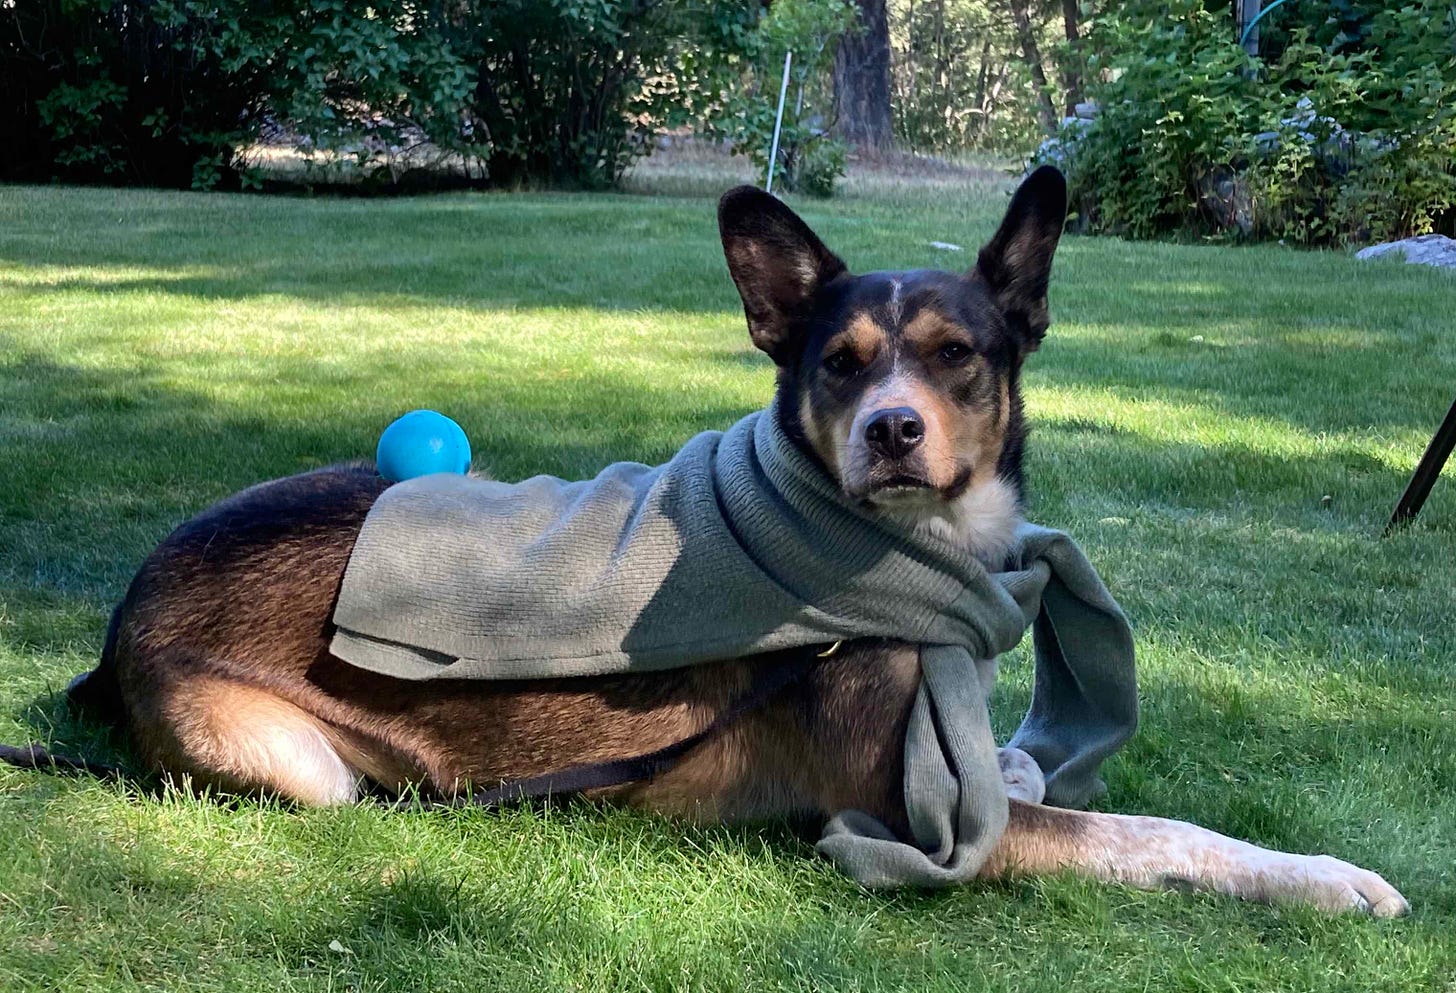 big eared dog with a scarf in a green lawn